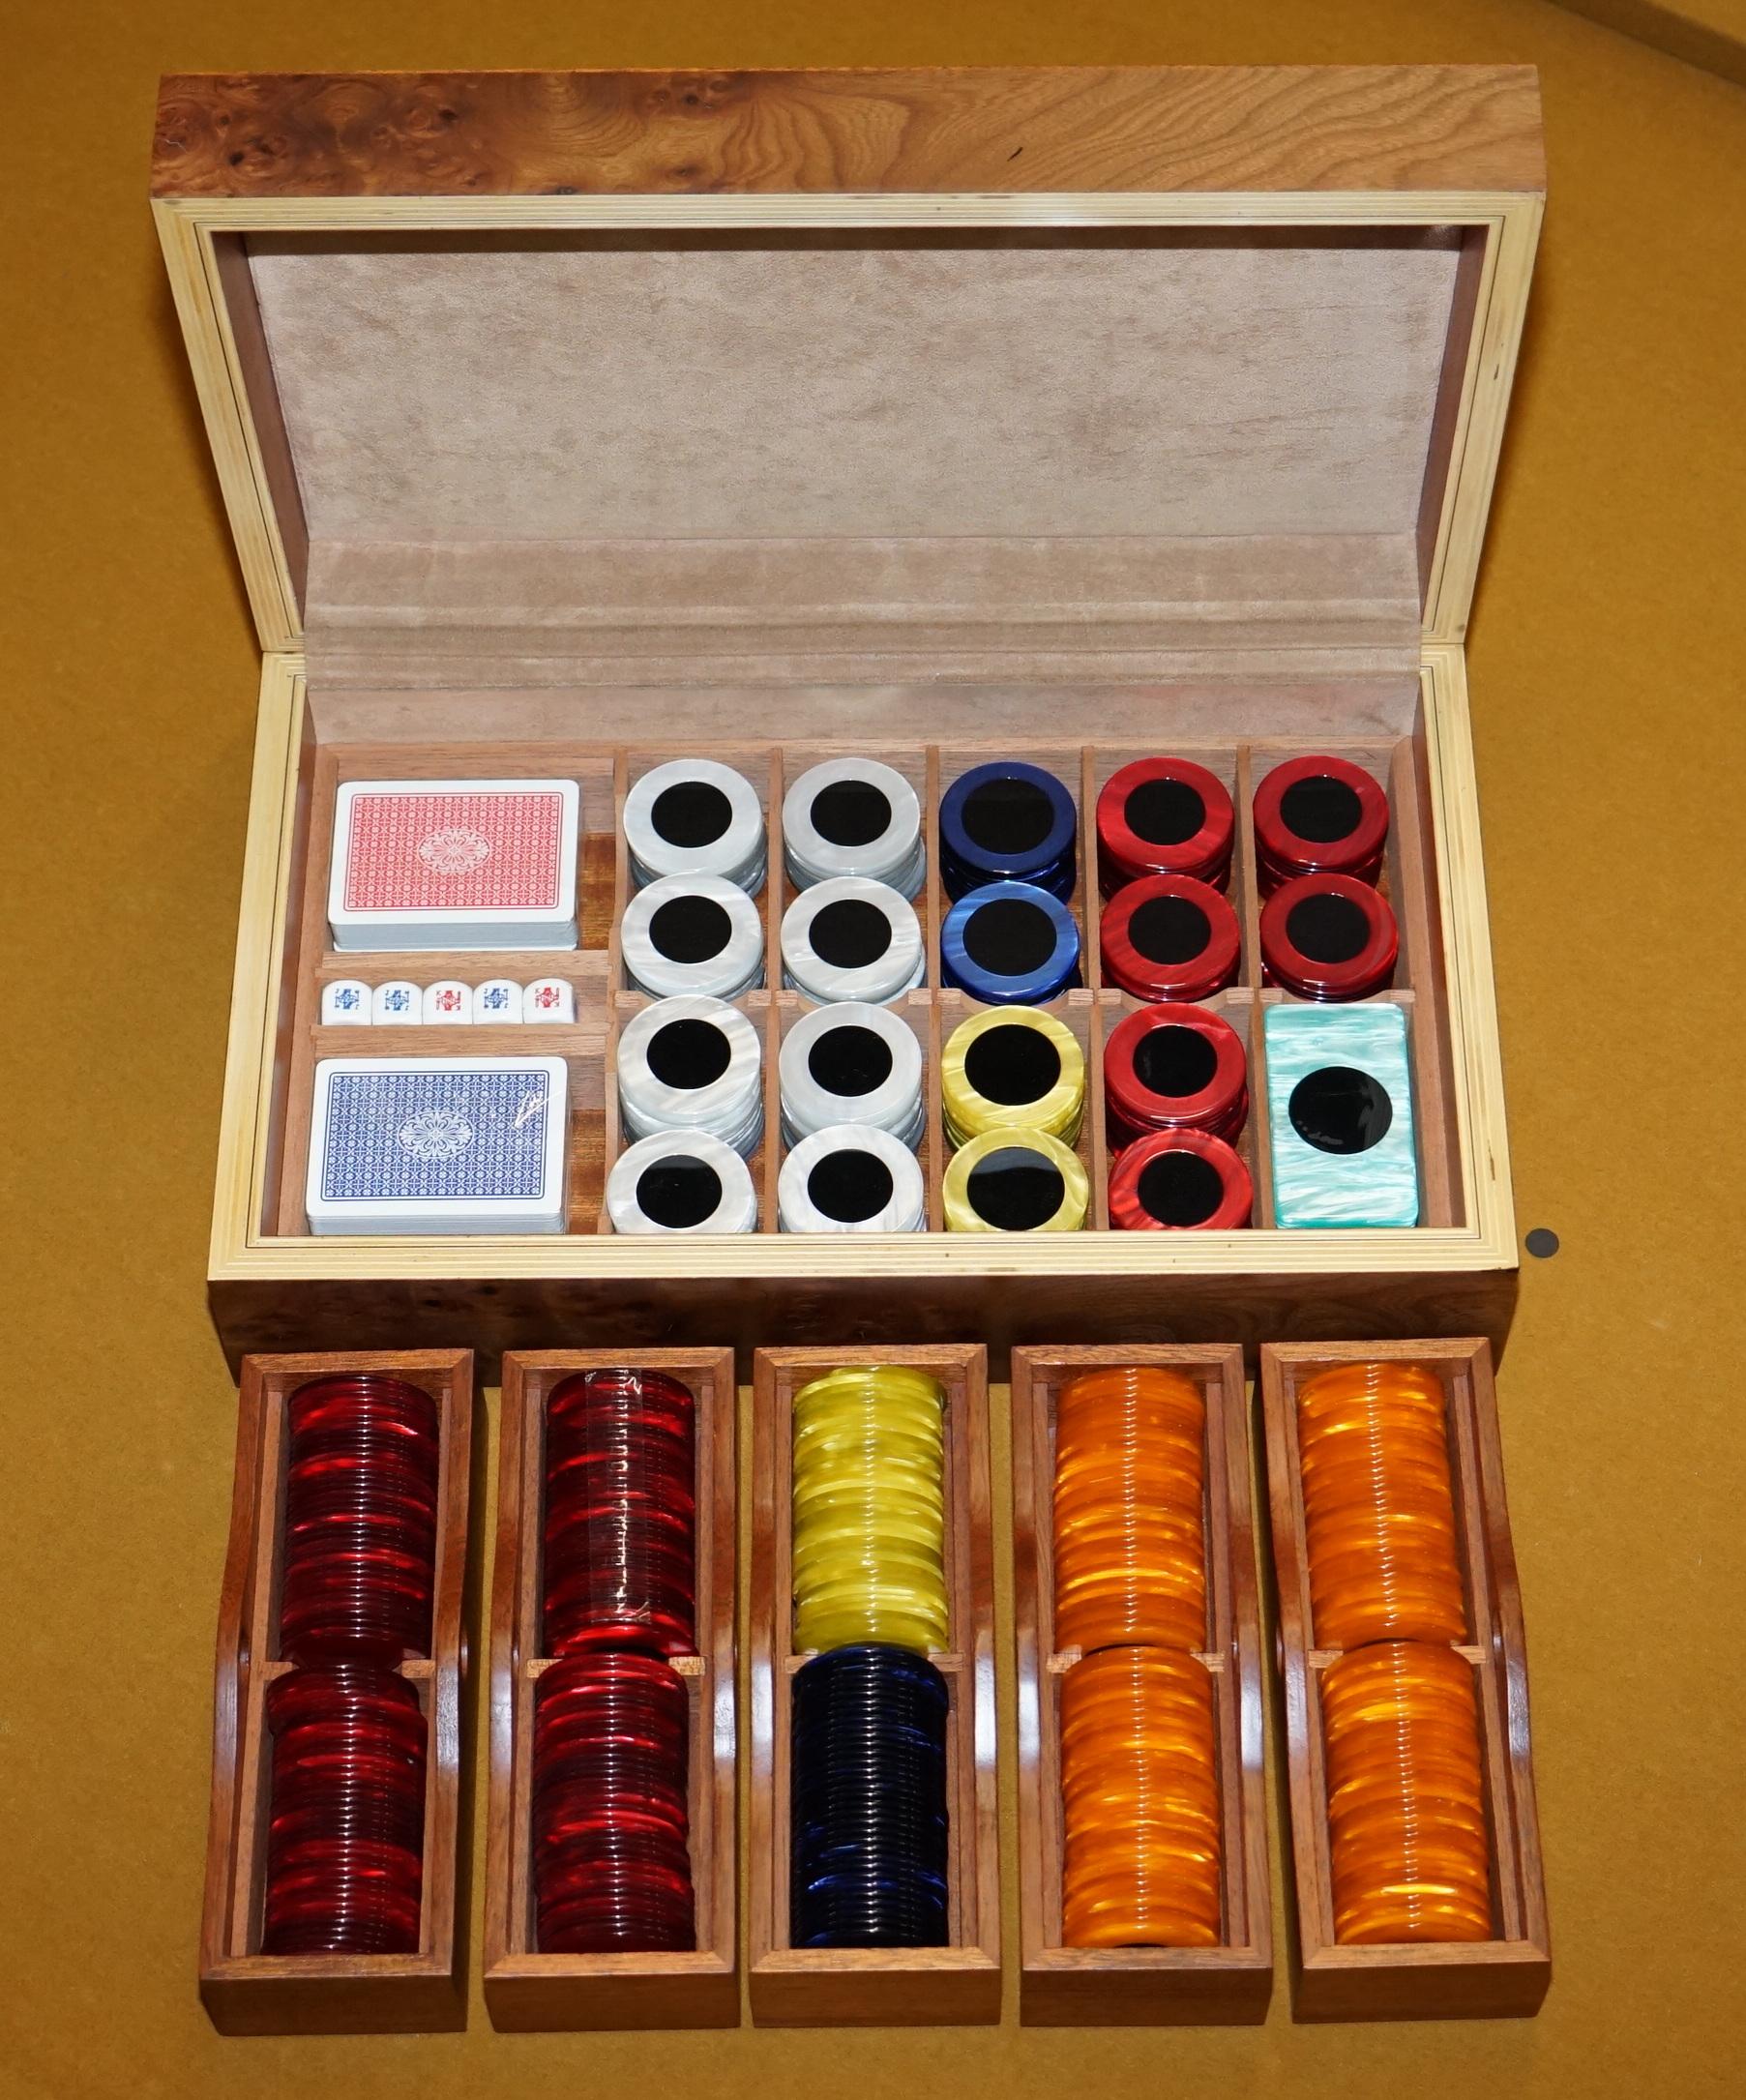 We are delighted to offer for sale this stunning vintage very rare new old stock handmade in Florence Italy by Asprey Poker game set with mother of pearl chips

This is a large and impressive set, modern day equivalent suites cost £6000-£8000 at